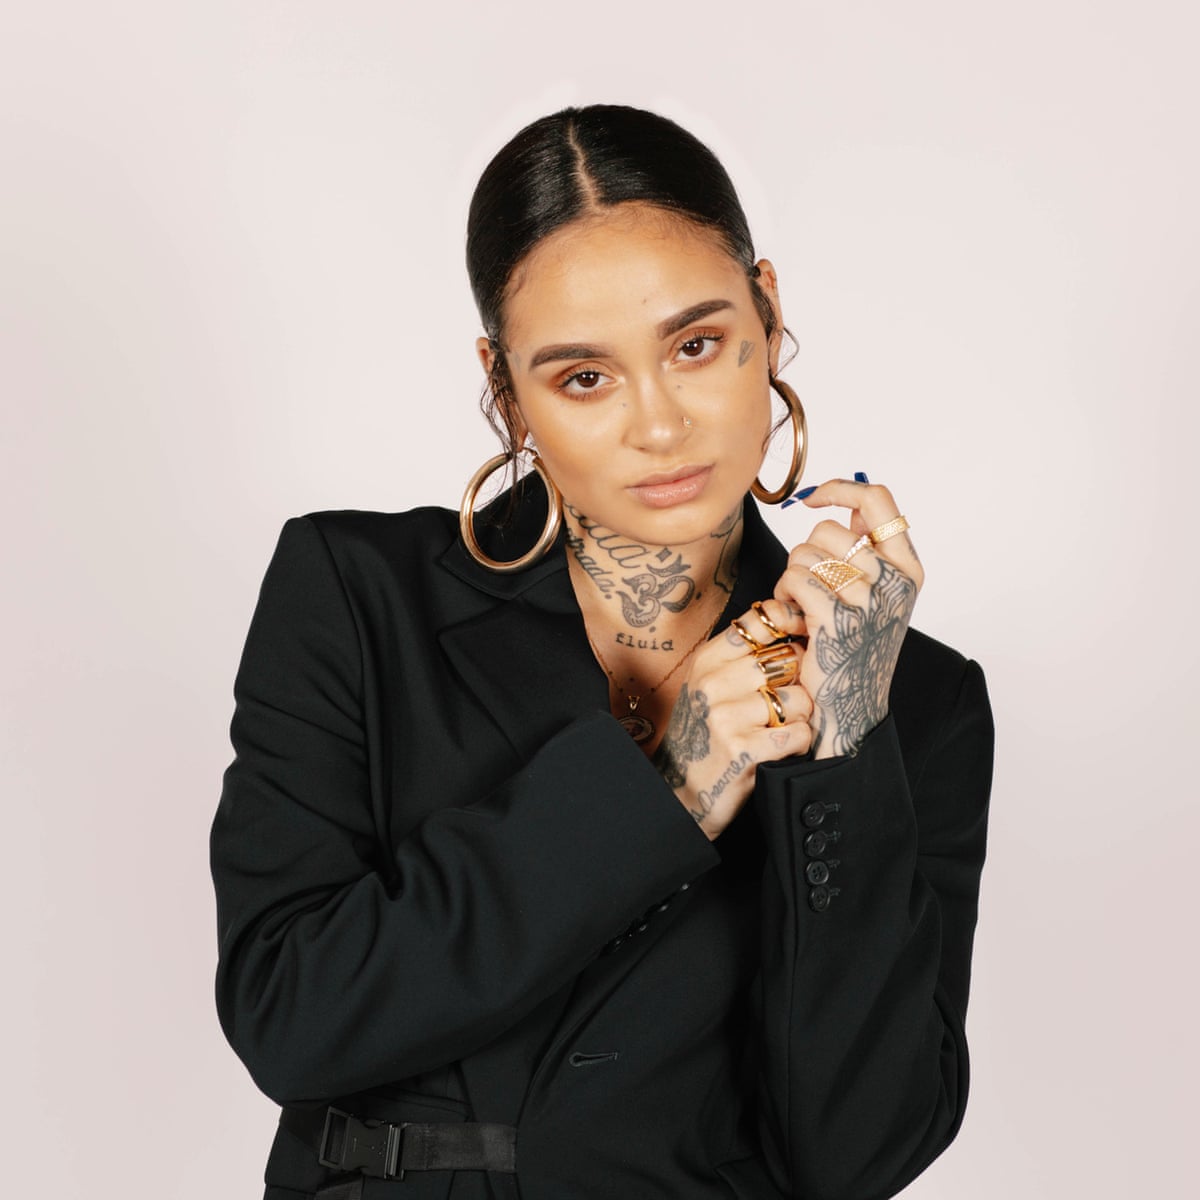 Kehlani struggles not to feel ‘guilty’ over friends’ deaths